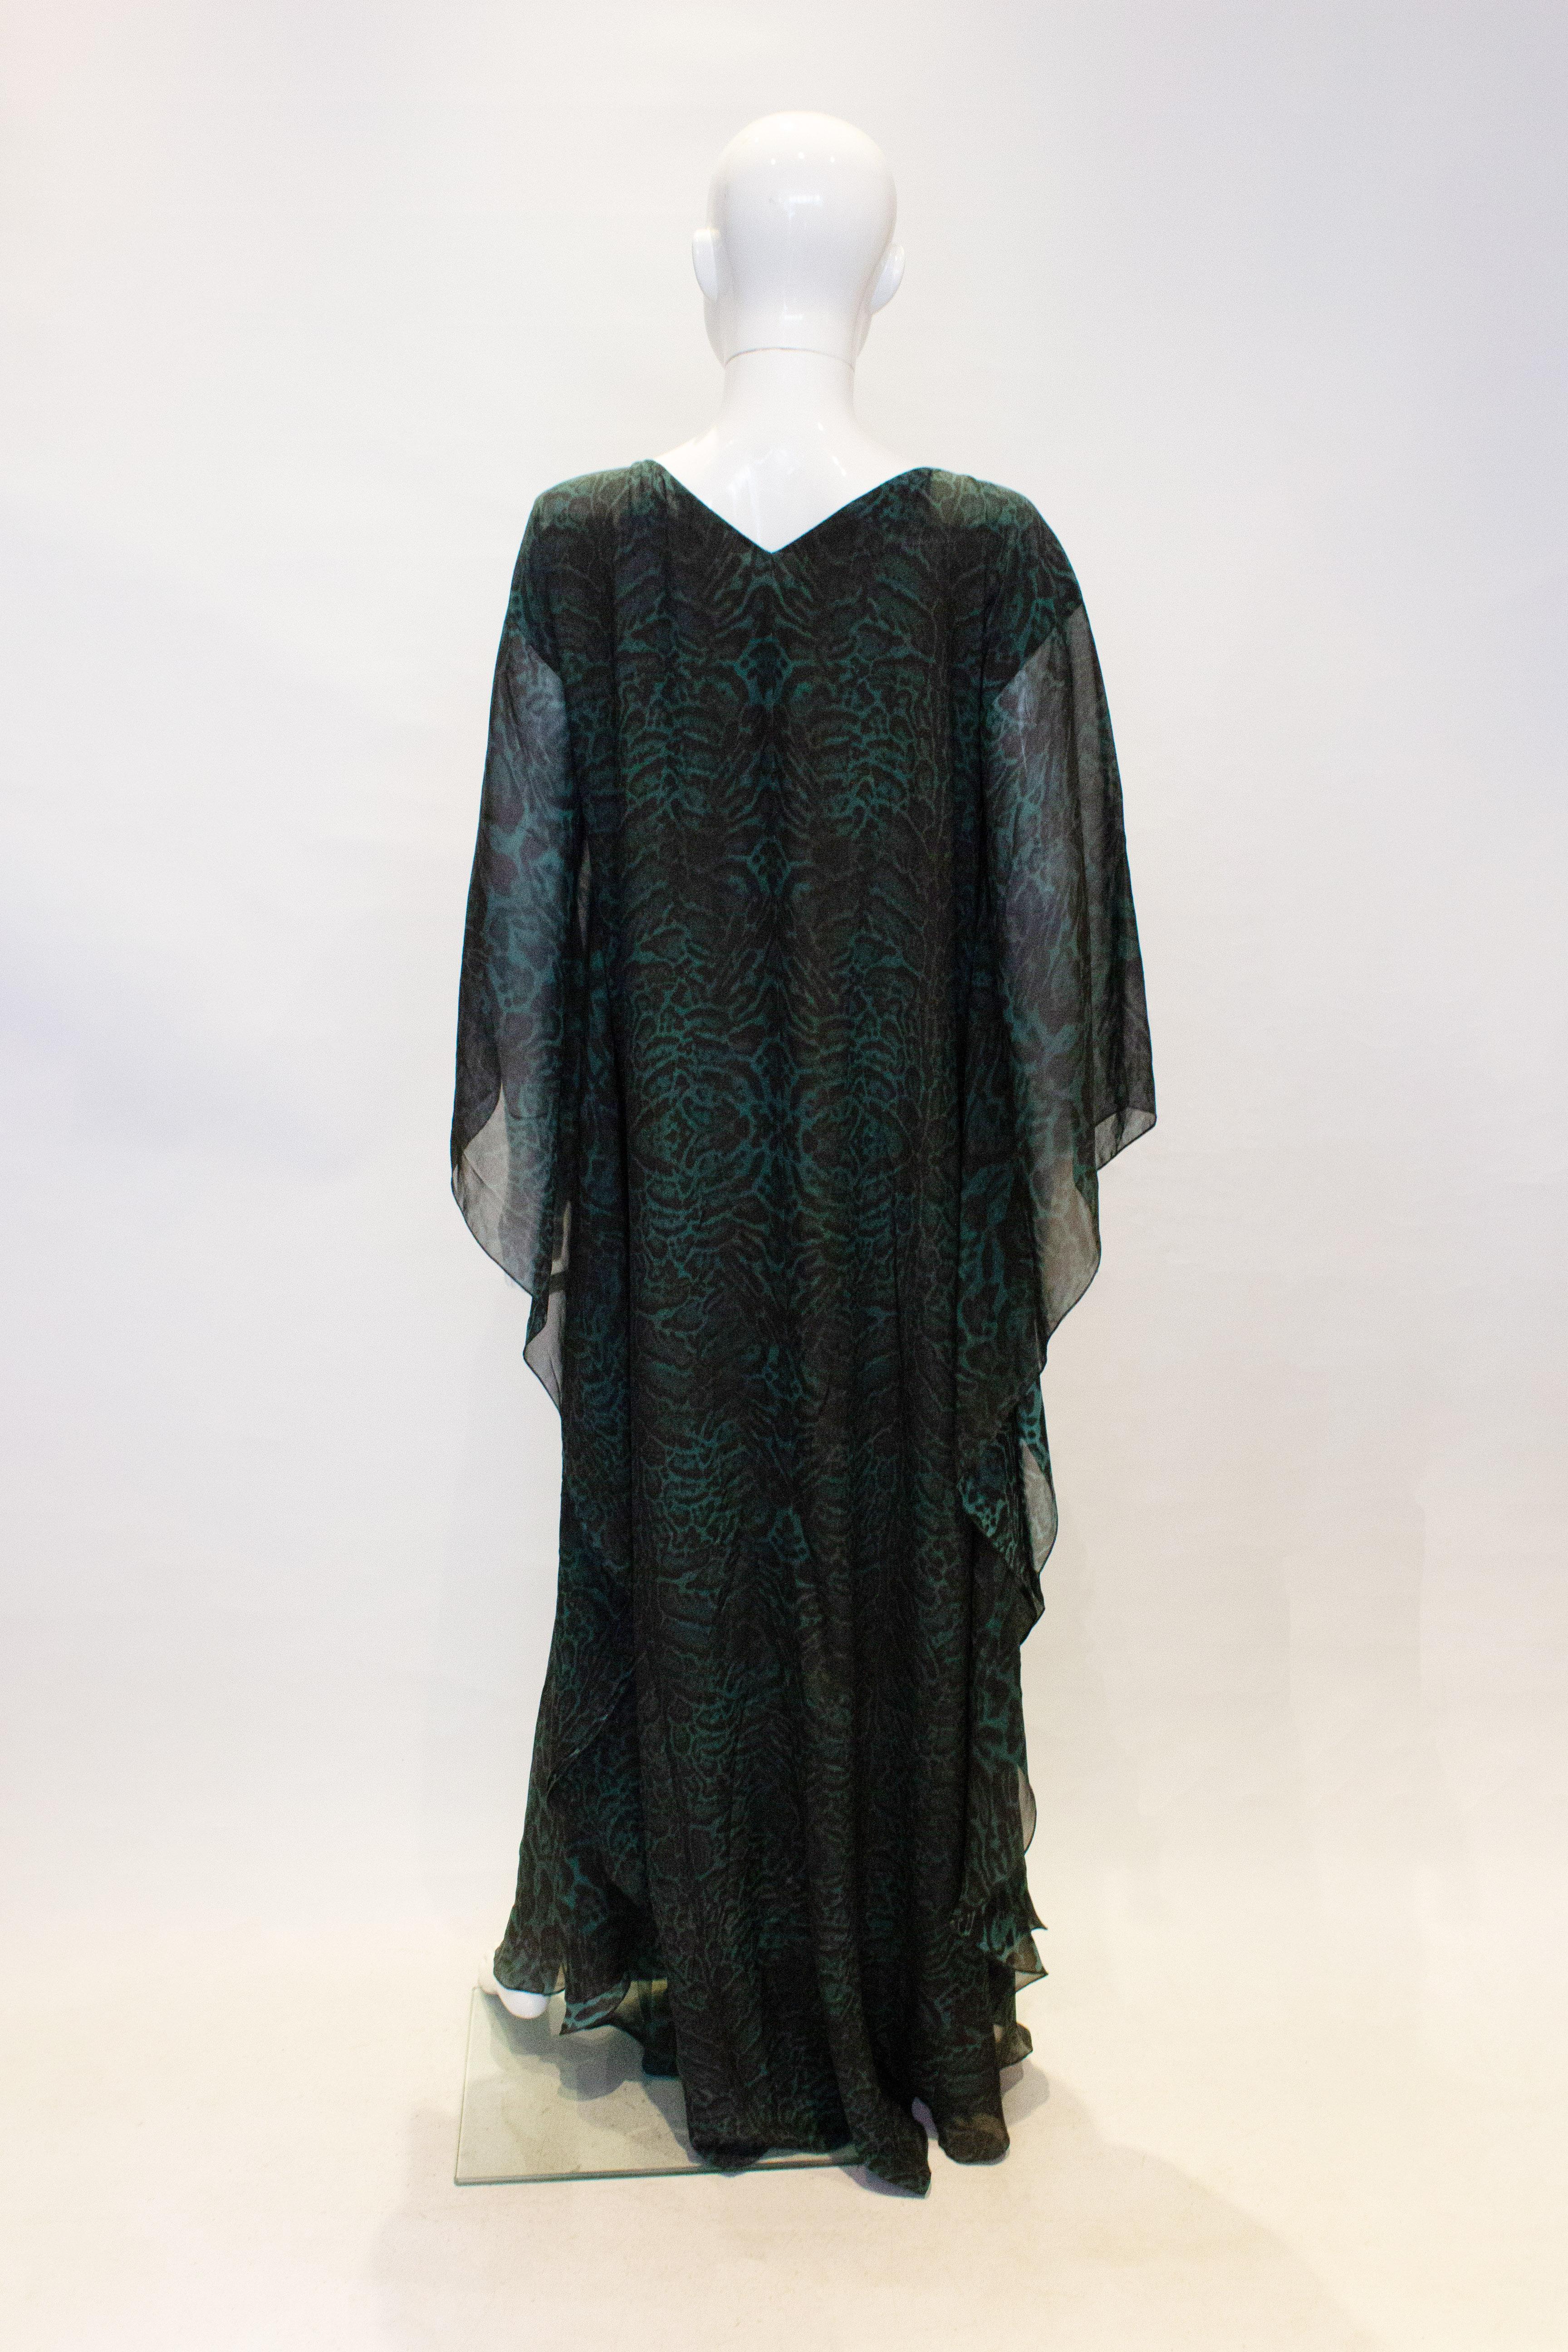 A wonderful kaftan for wafting by Amanda Wakely , London. The fabric is a beautiful sea green and black print with metal detail and a tie opening at the front, it as a v backline. Measurements :bust up to 40'', length 63''